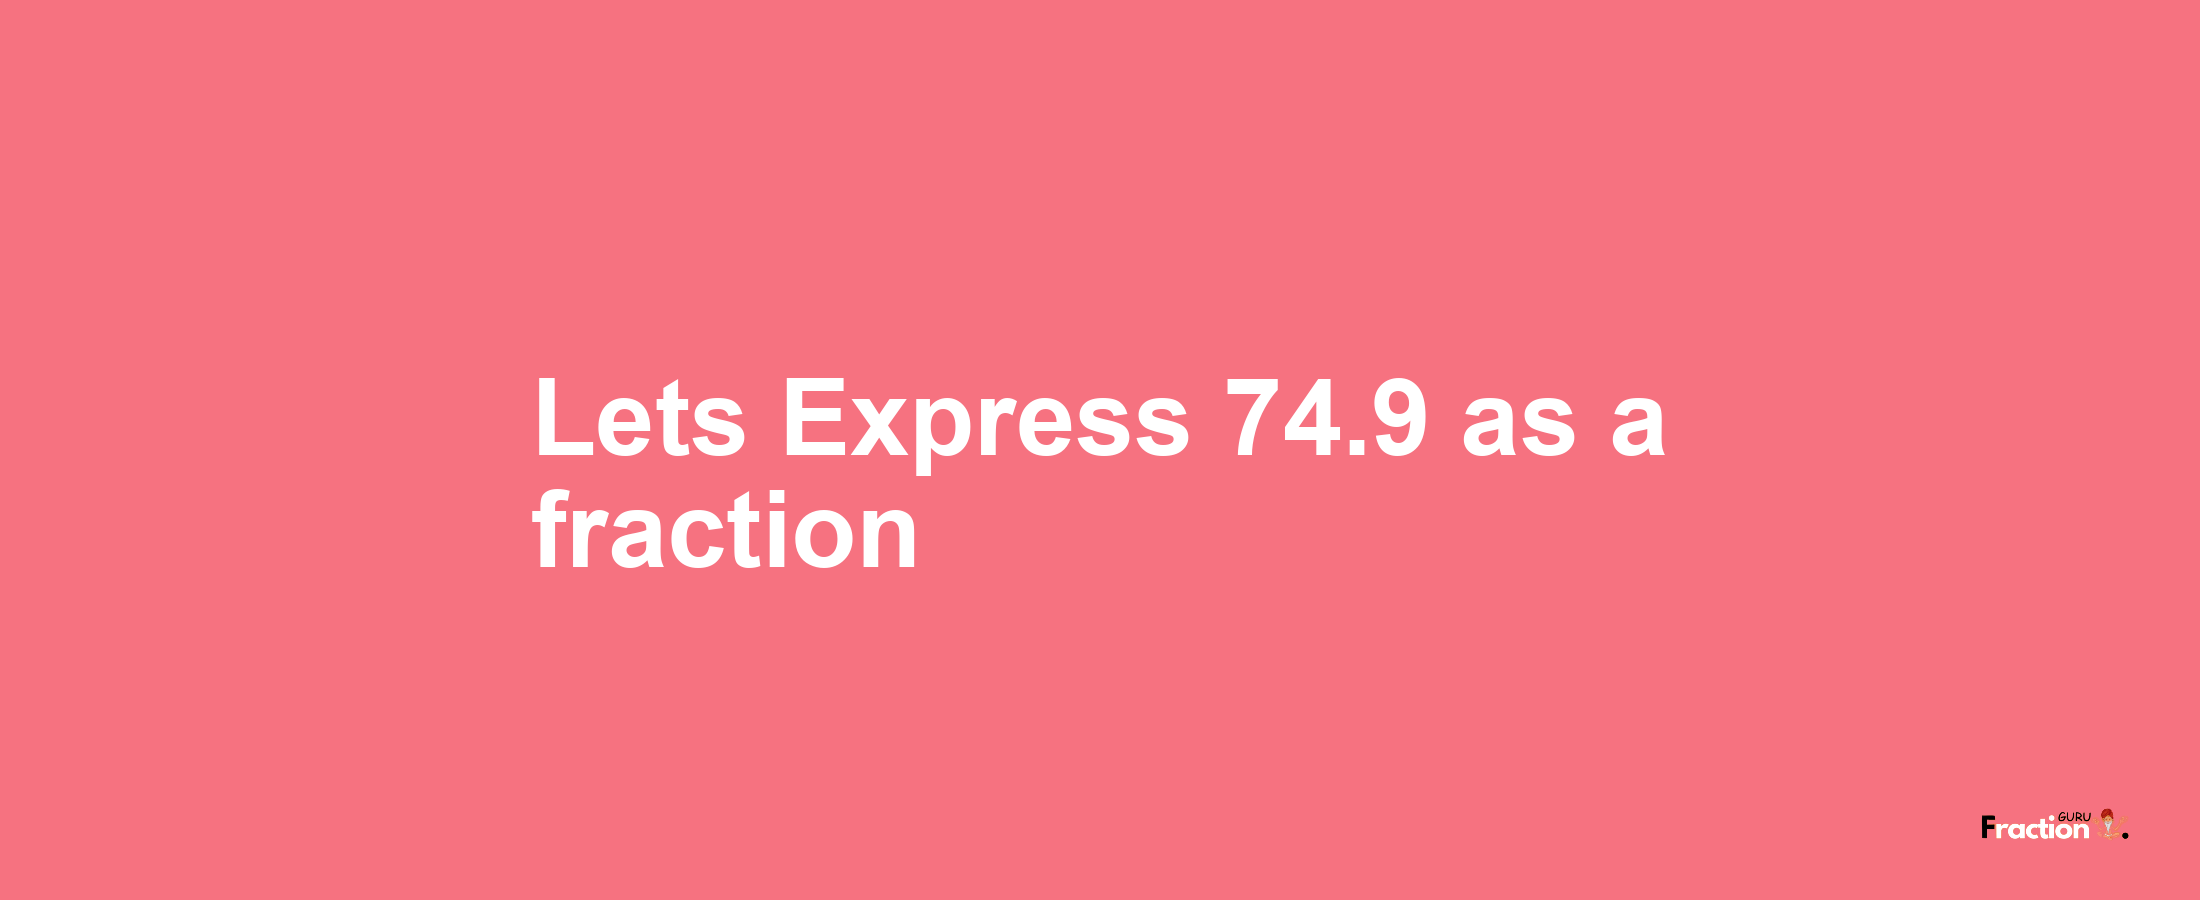 Lets Express 74.9 as afraction